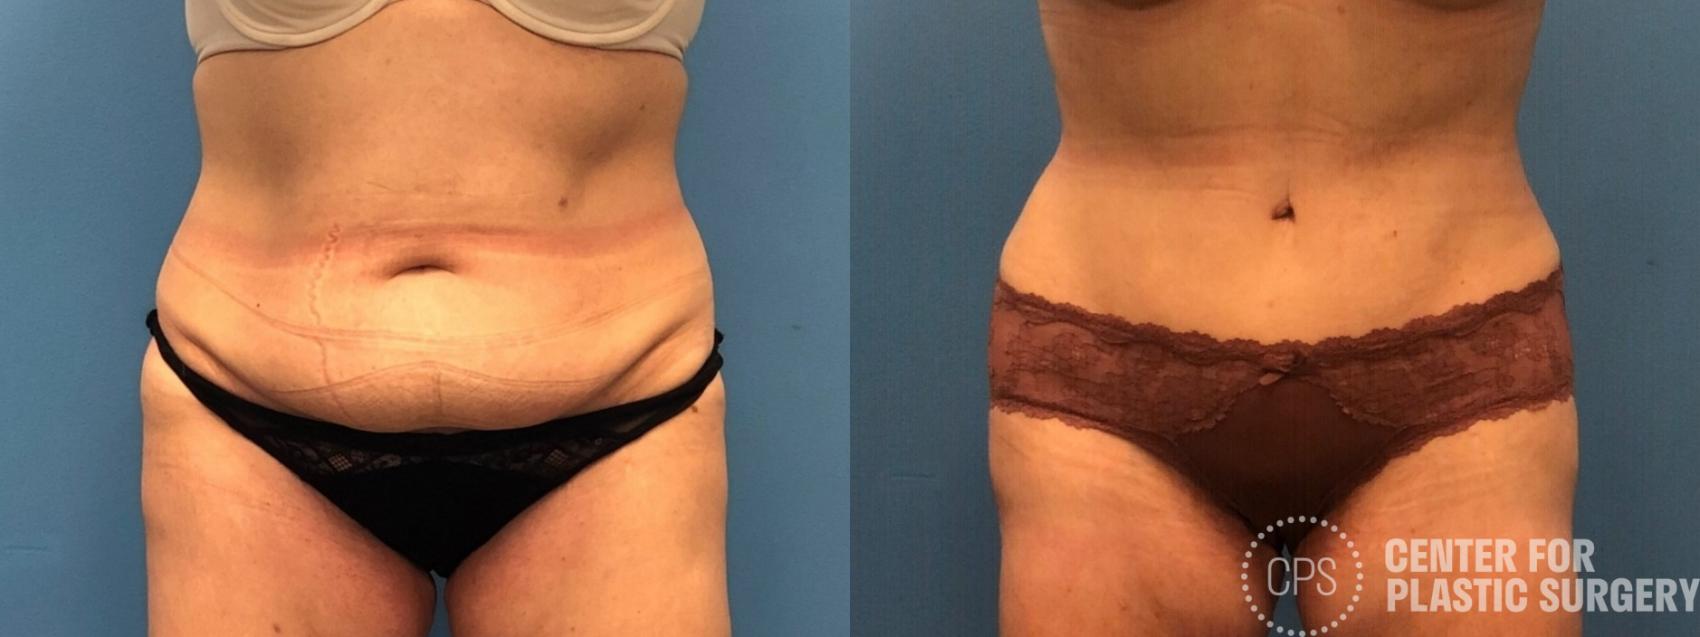 Tummy Tuck Case 251 Before & After Front | Chevy Chase & Annandale, Washington D.C. Metropolitan Area | Center for Plastic Surgery